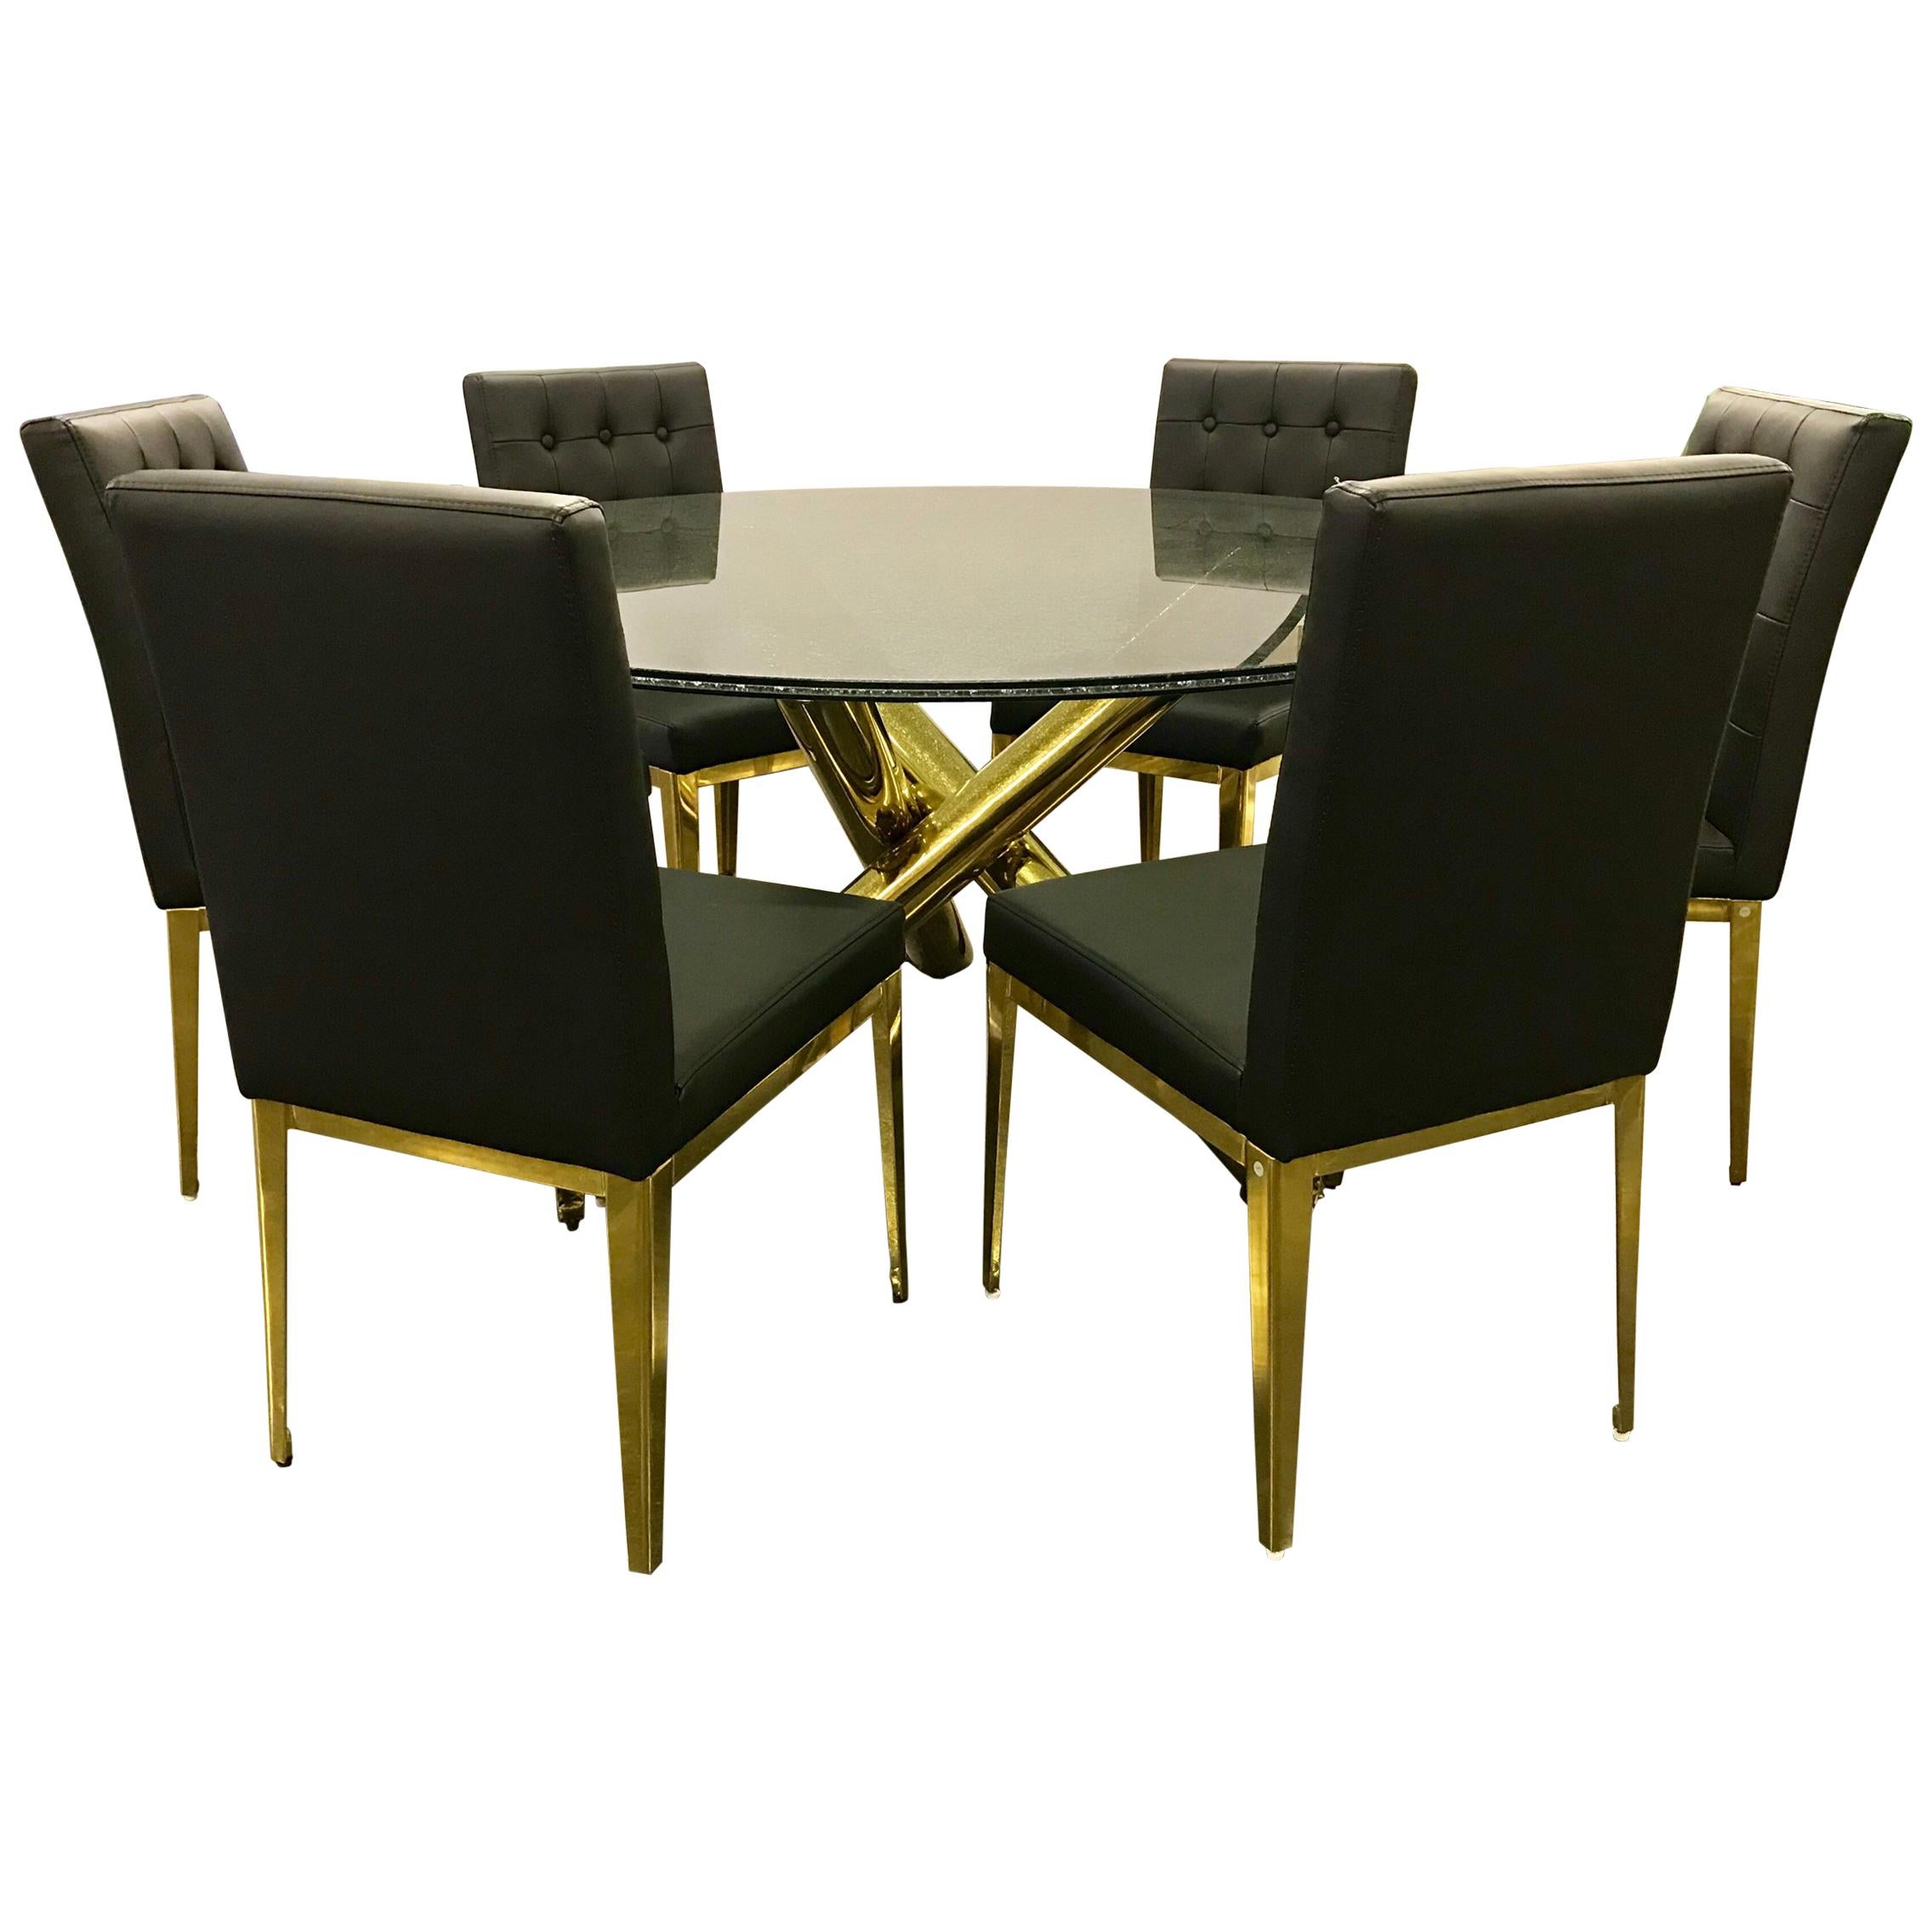 Round Glass and Brass Dining Table and 6 Black Leather Chairs